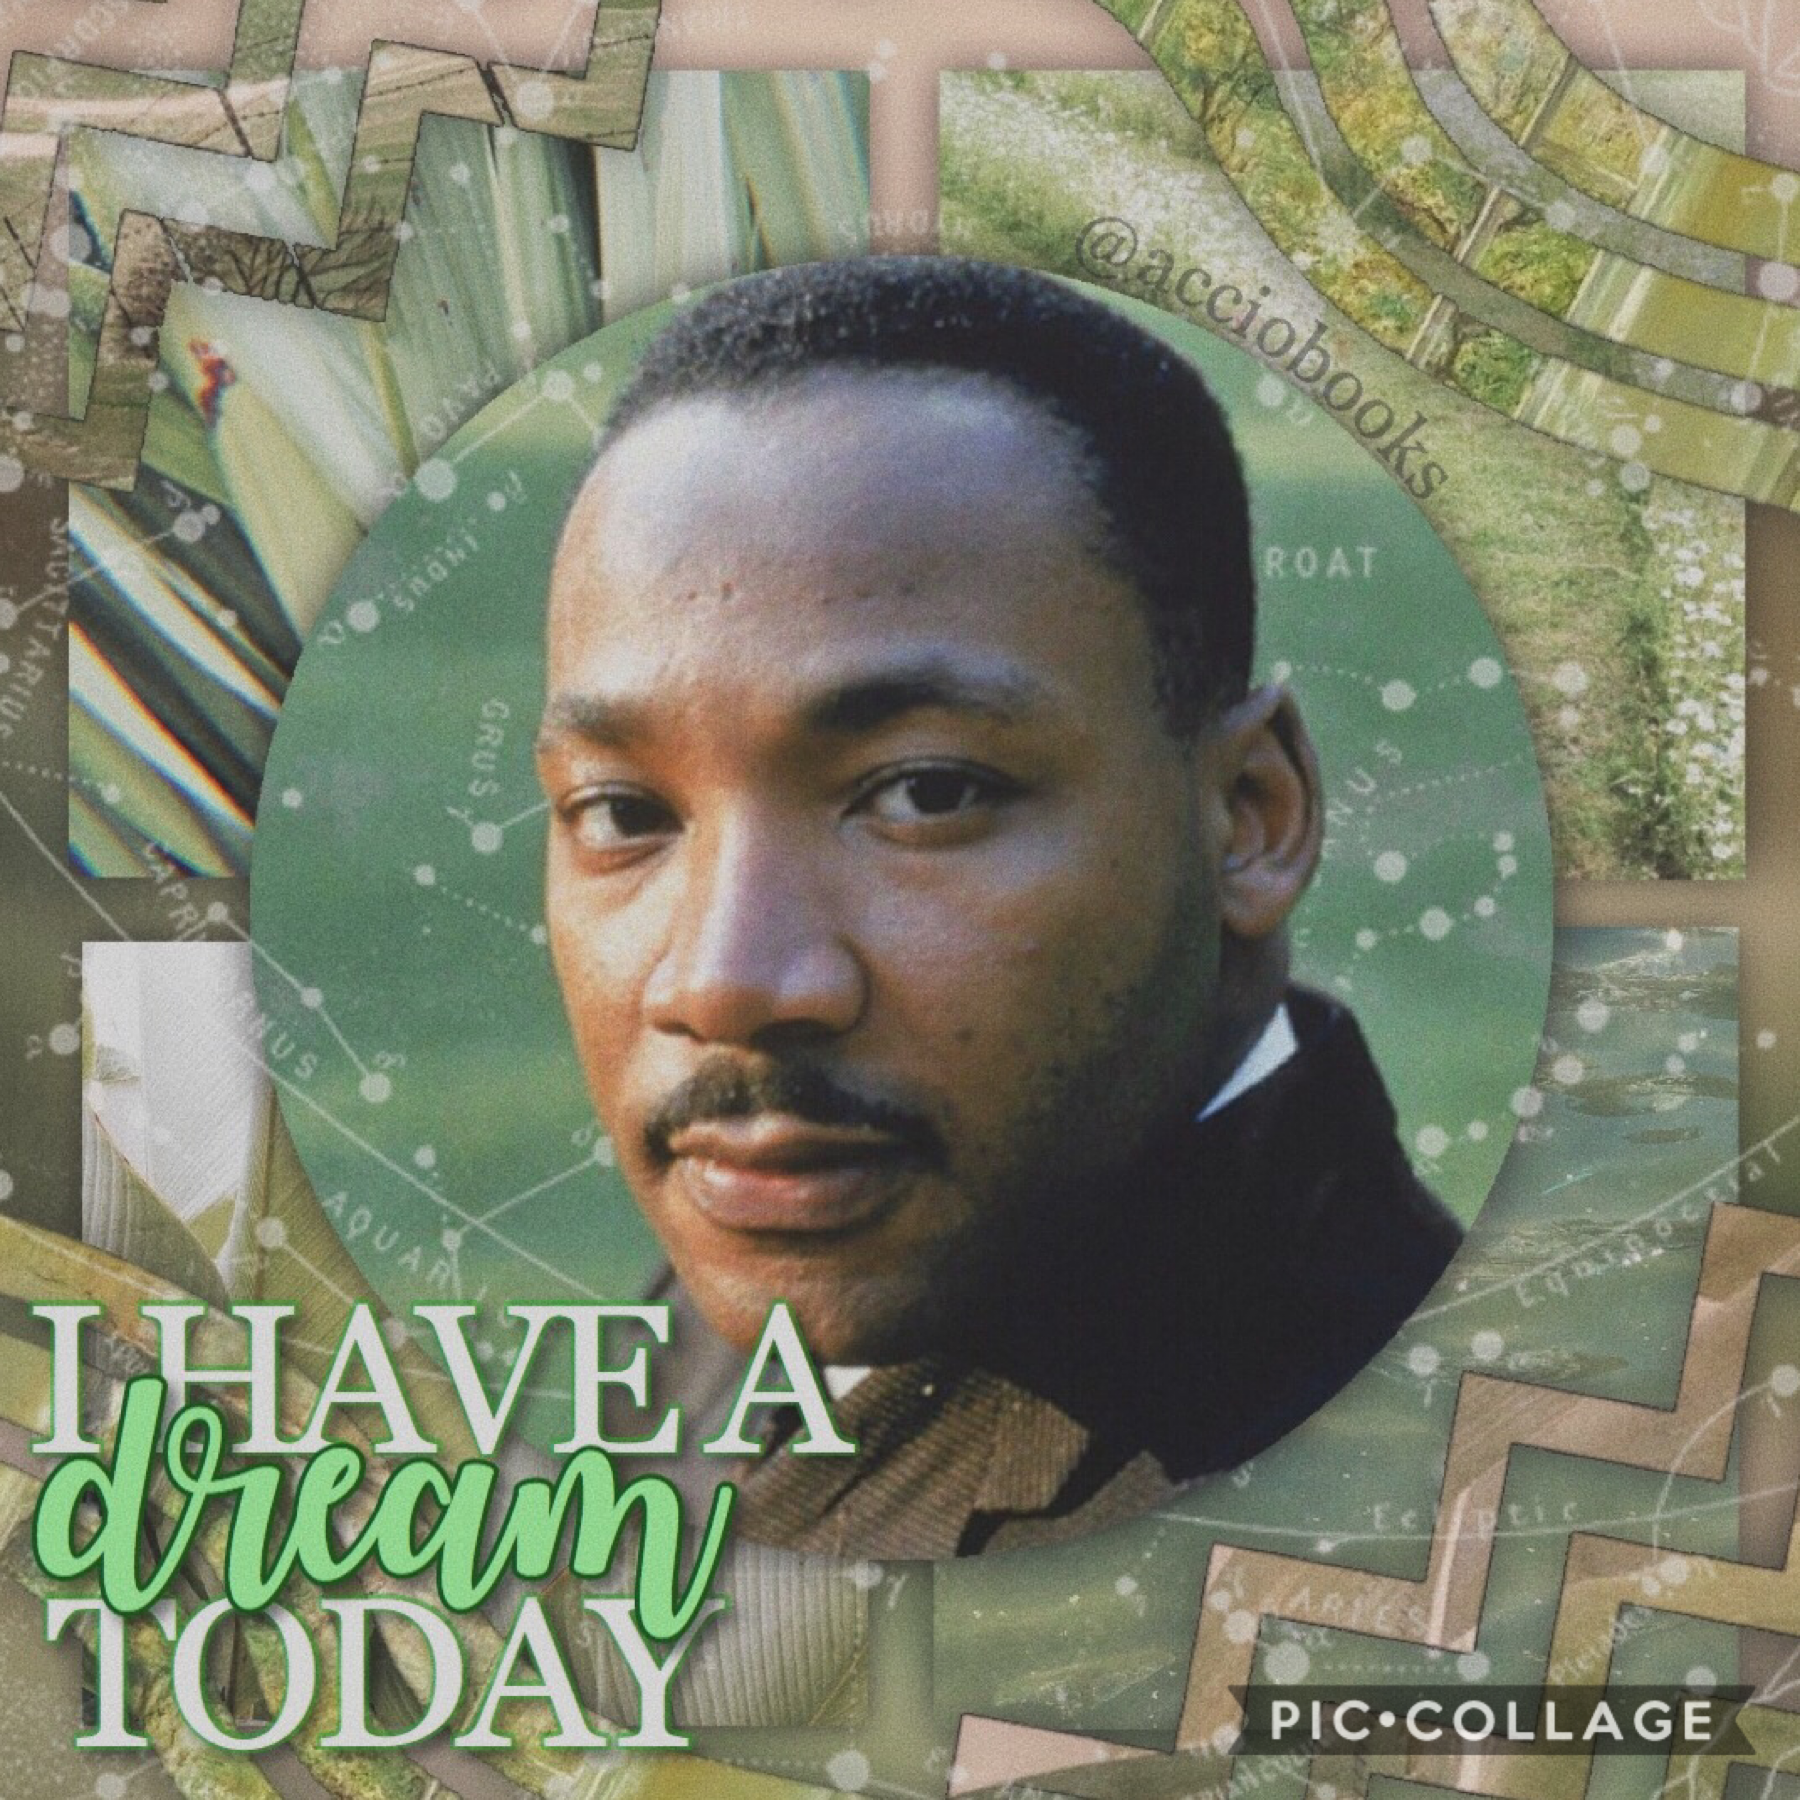 tap 💚
as it is Black History Month, I decided to make an edit for one of the African American icons, MLK. He brought equality to America and embraced kindness and dreams.
❓QOTD: who’s your fav POC celebrity?